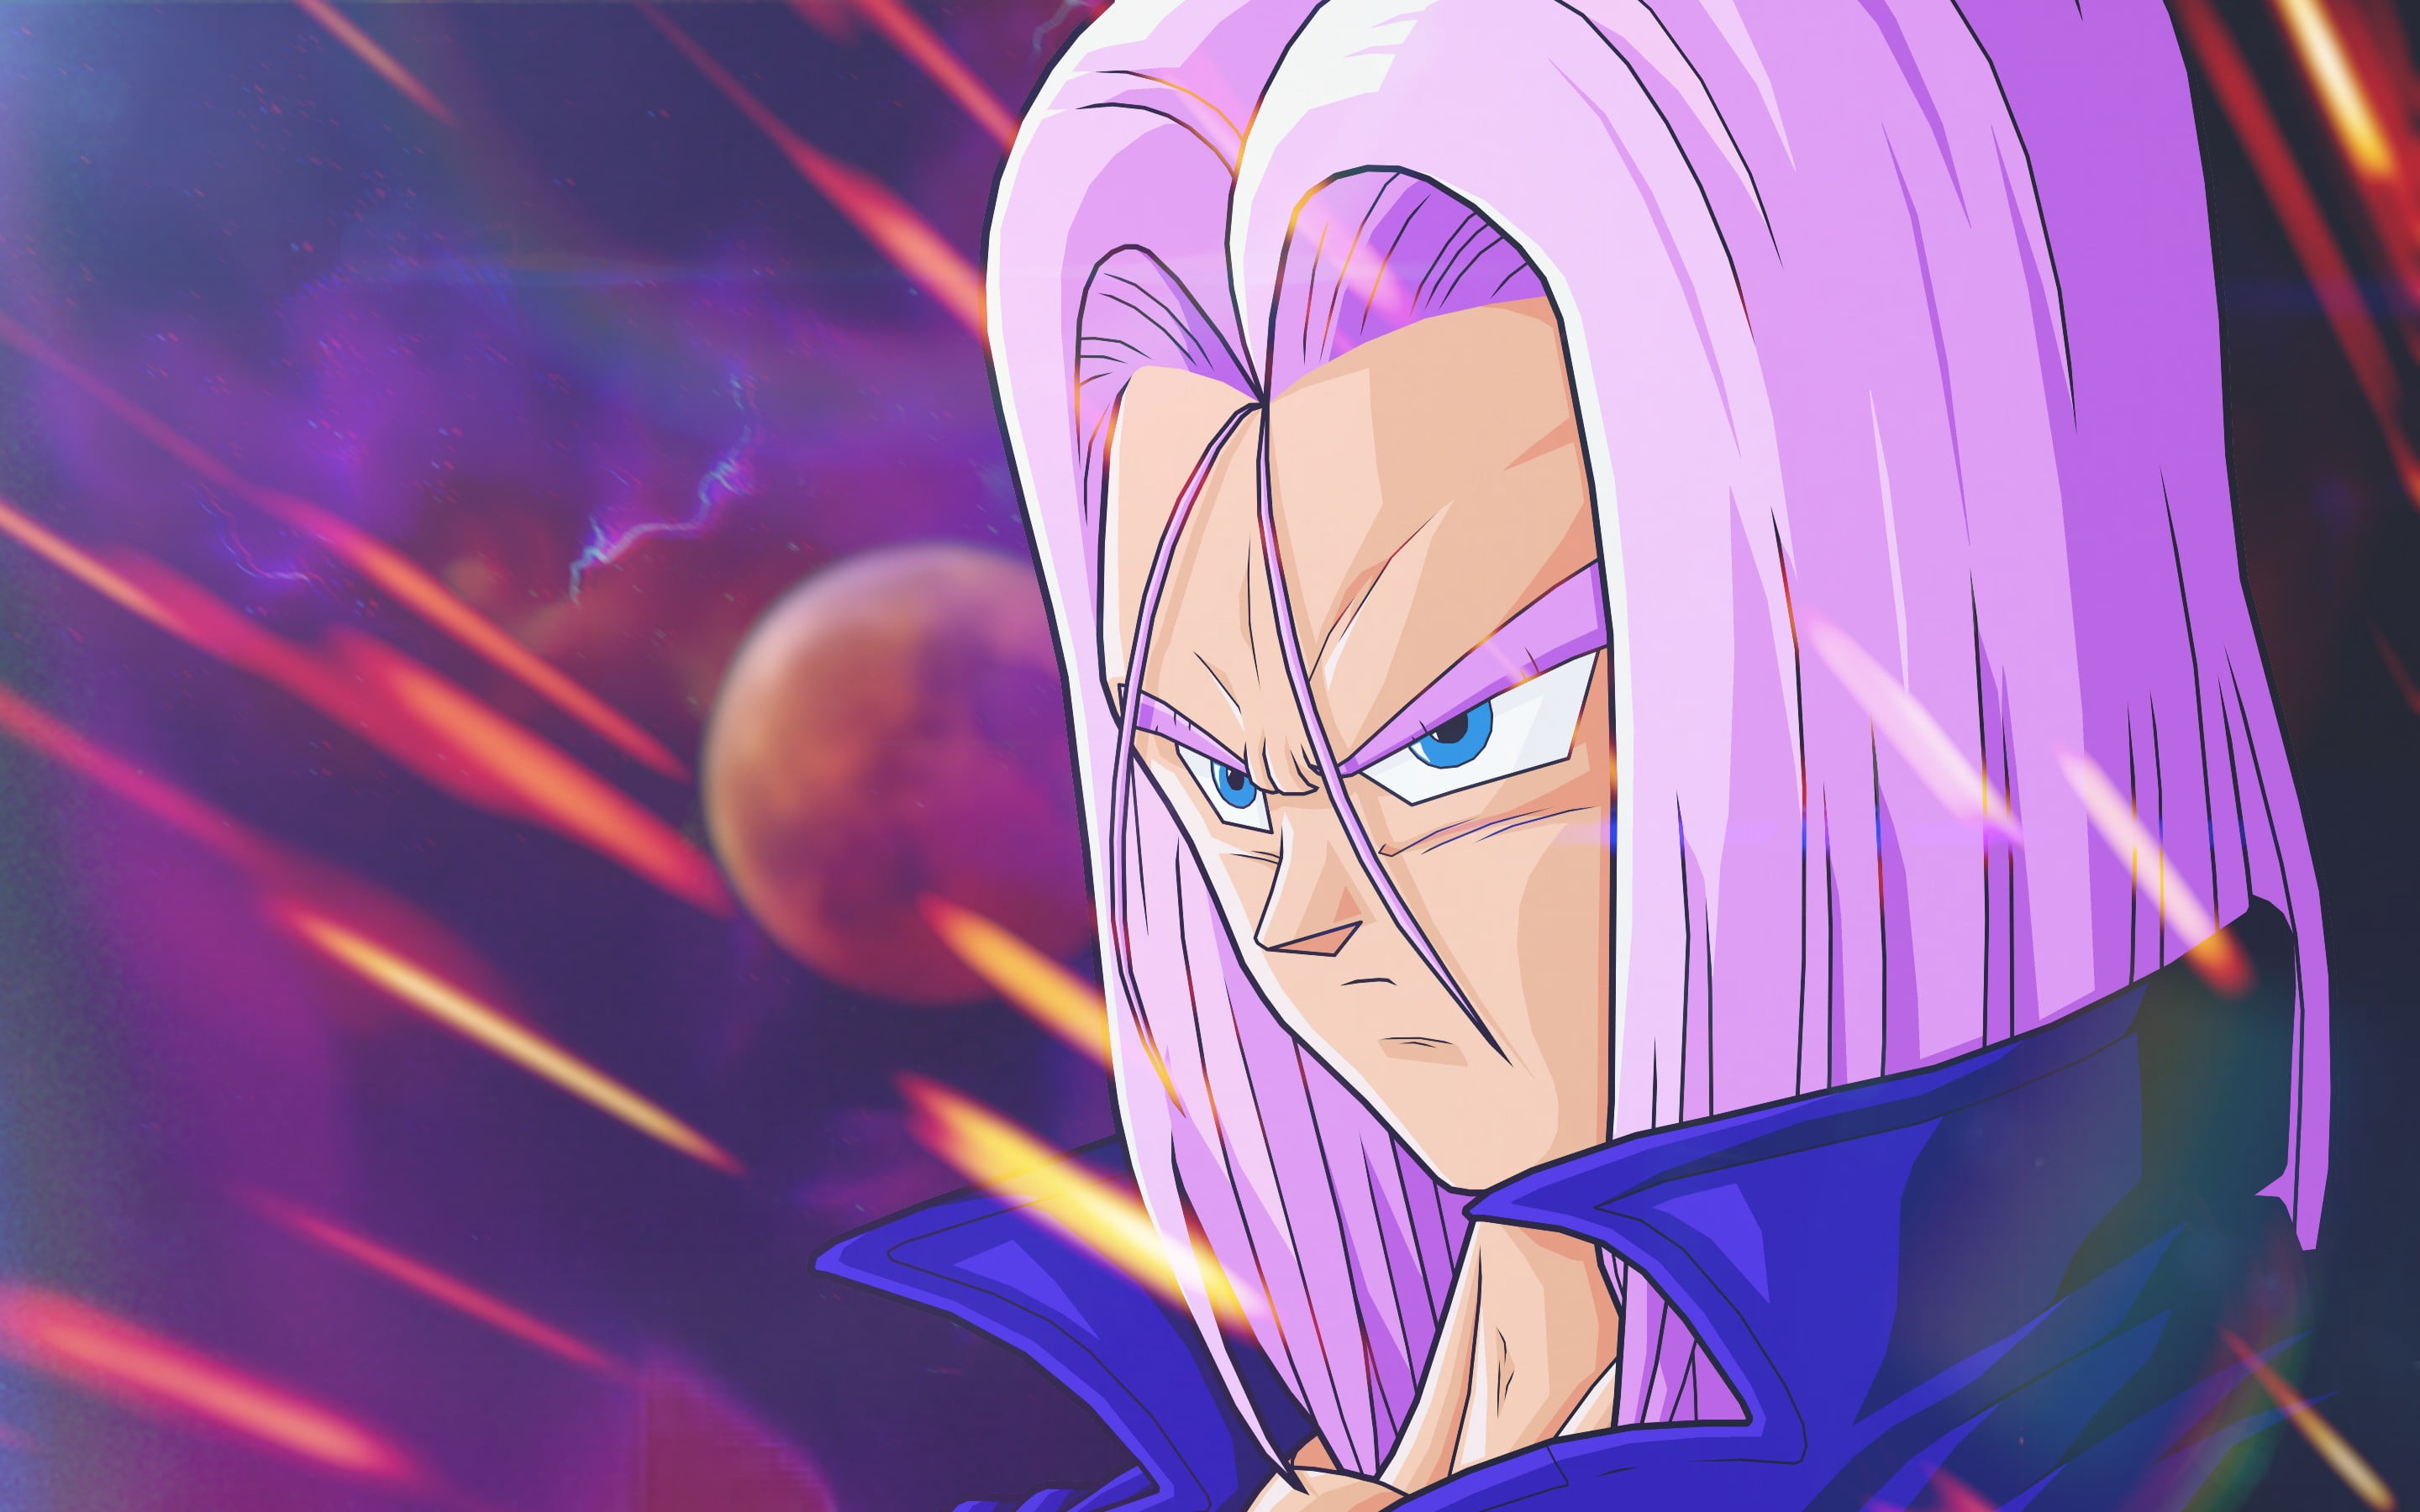 Trunks Hair Color: Purple or Blue? - wide 7